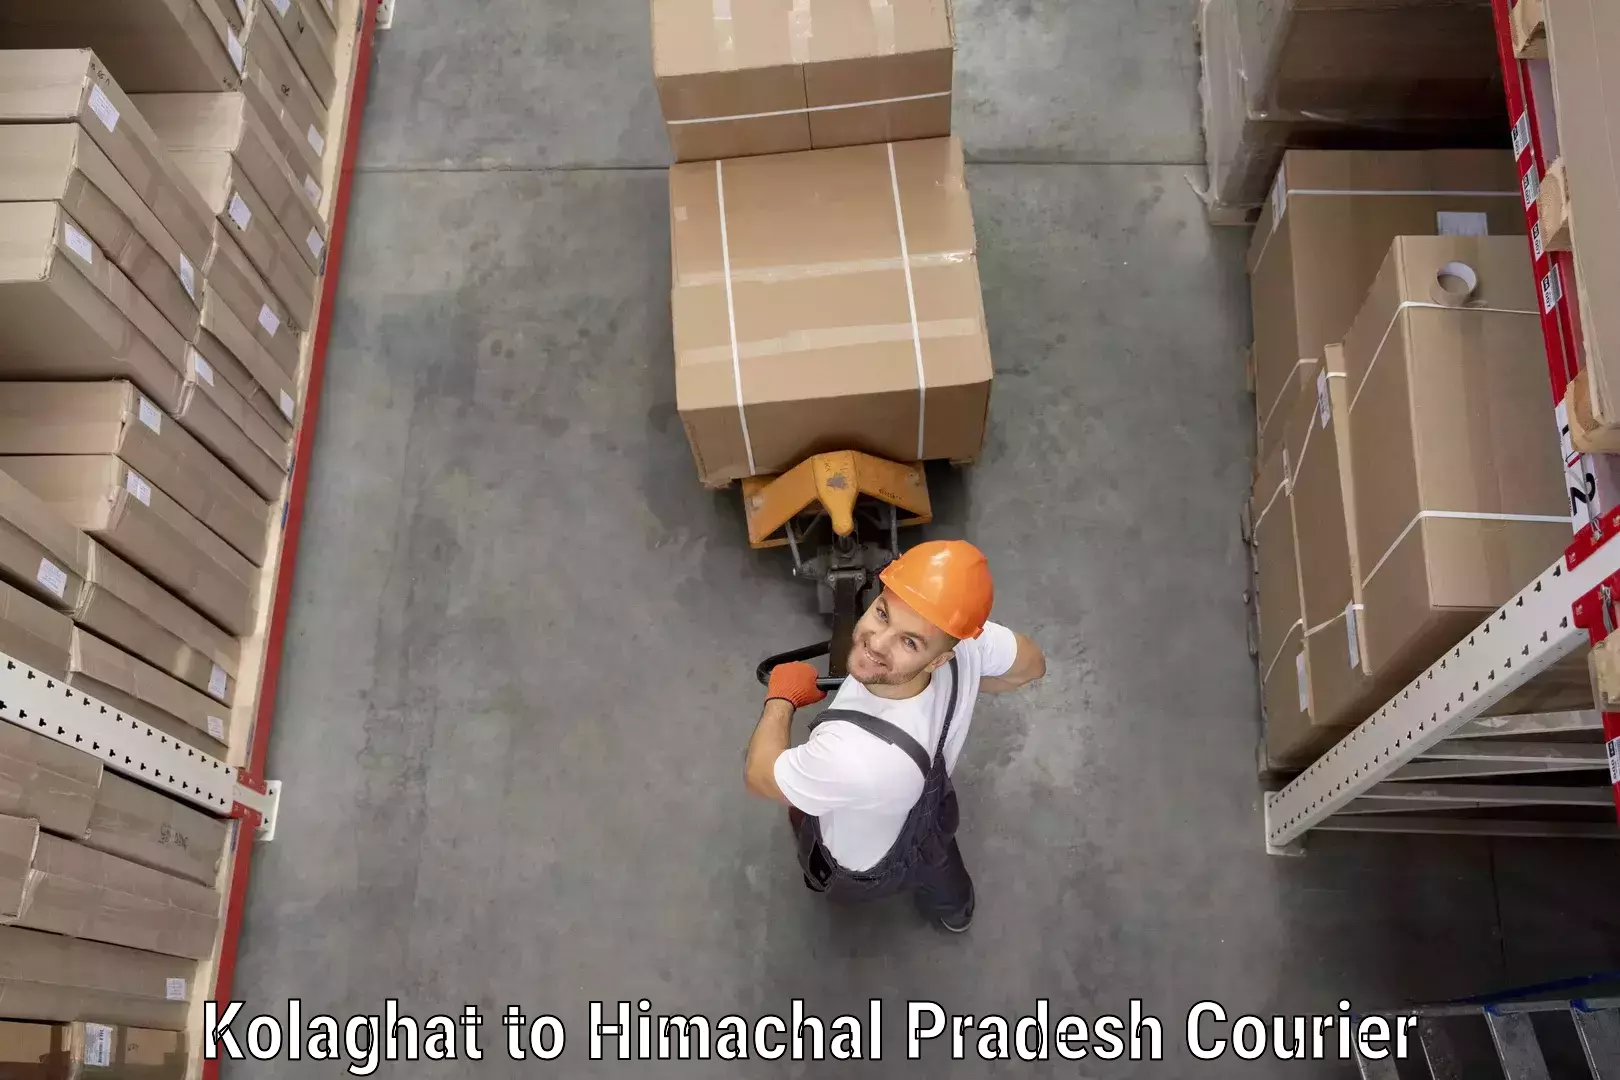 Courier service comparison in Kolaghat to Himachal Pradesh